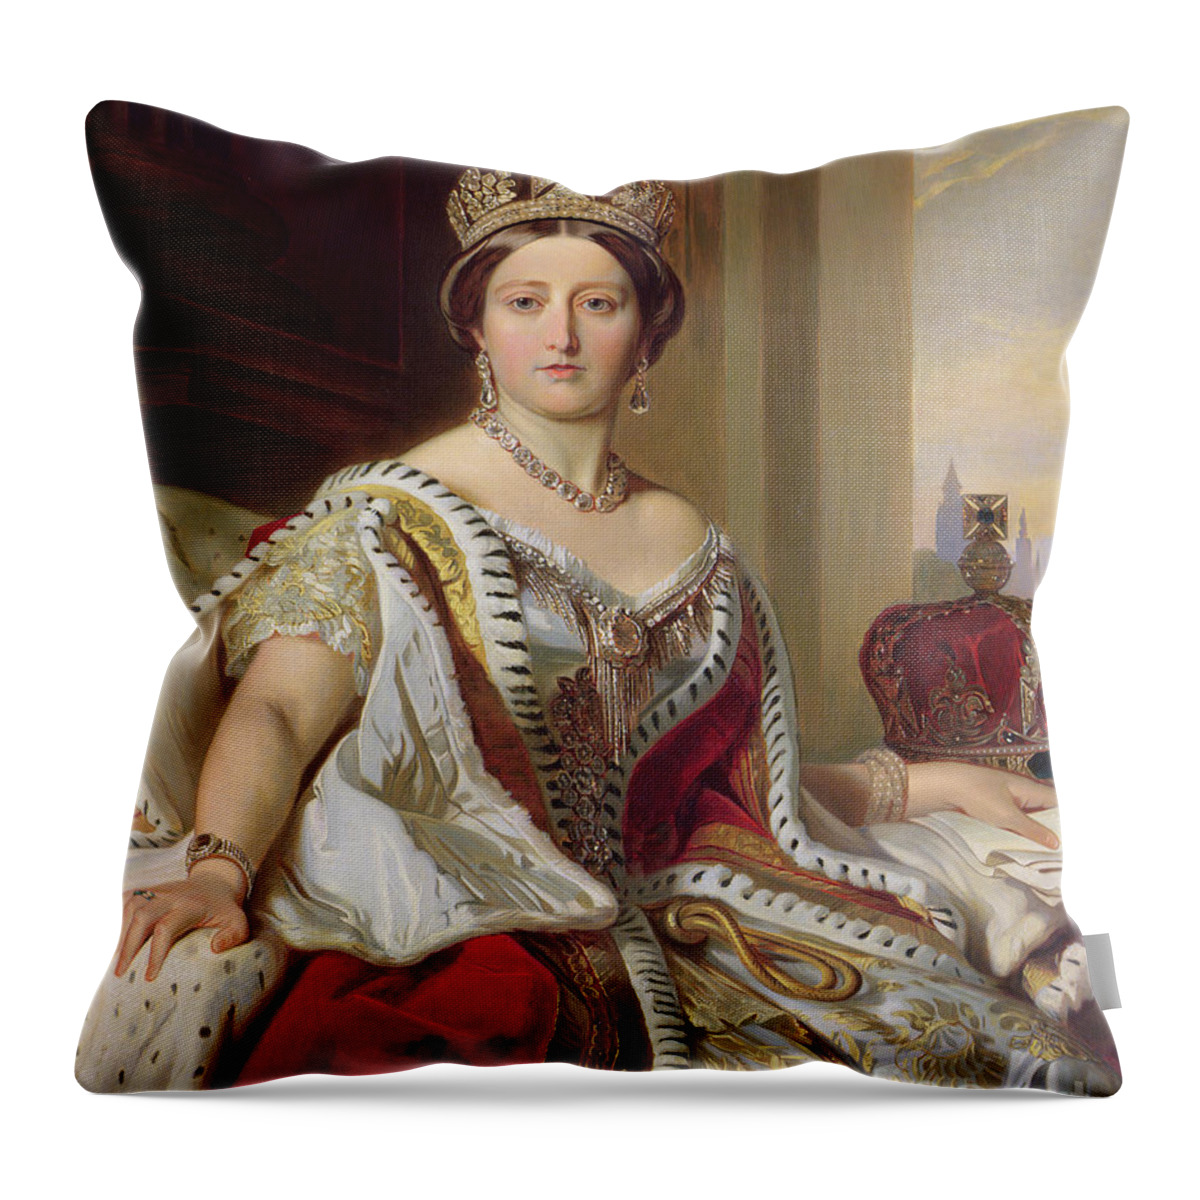 Female; Three-quarter Length; Seated; Crown; Ermine-trimmed Robe; Ermine; Jewellery; Jewelry; Queen; Royal; Imposing; Regal; Robes; Official; Formal; Young; Youth; Queen Throw Pillow featuring the painting Portrait of Queen Victoria by Franz Xavier Winterhalter